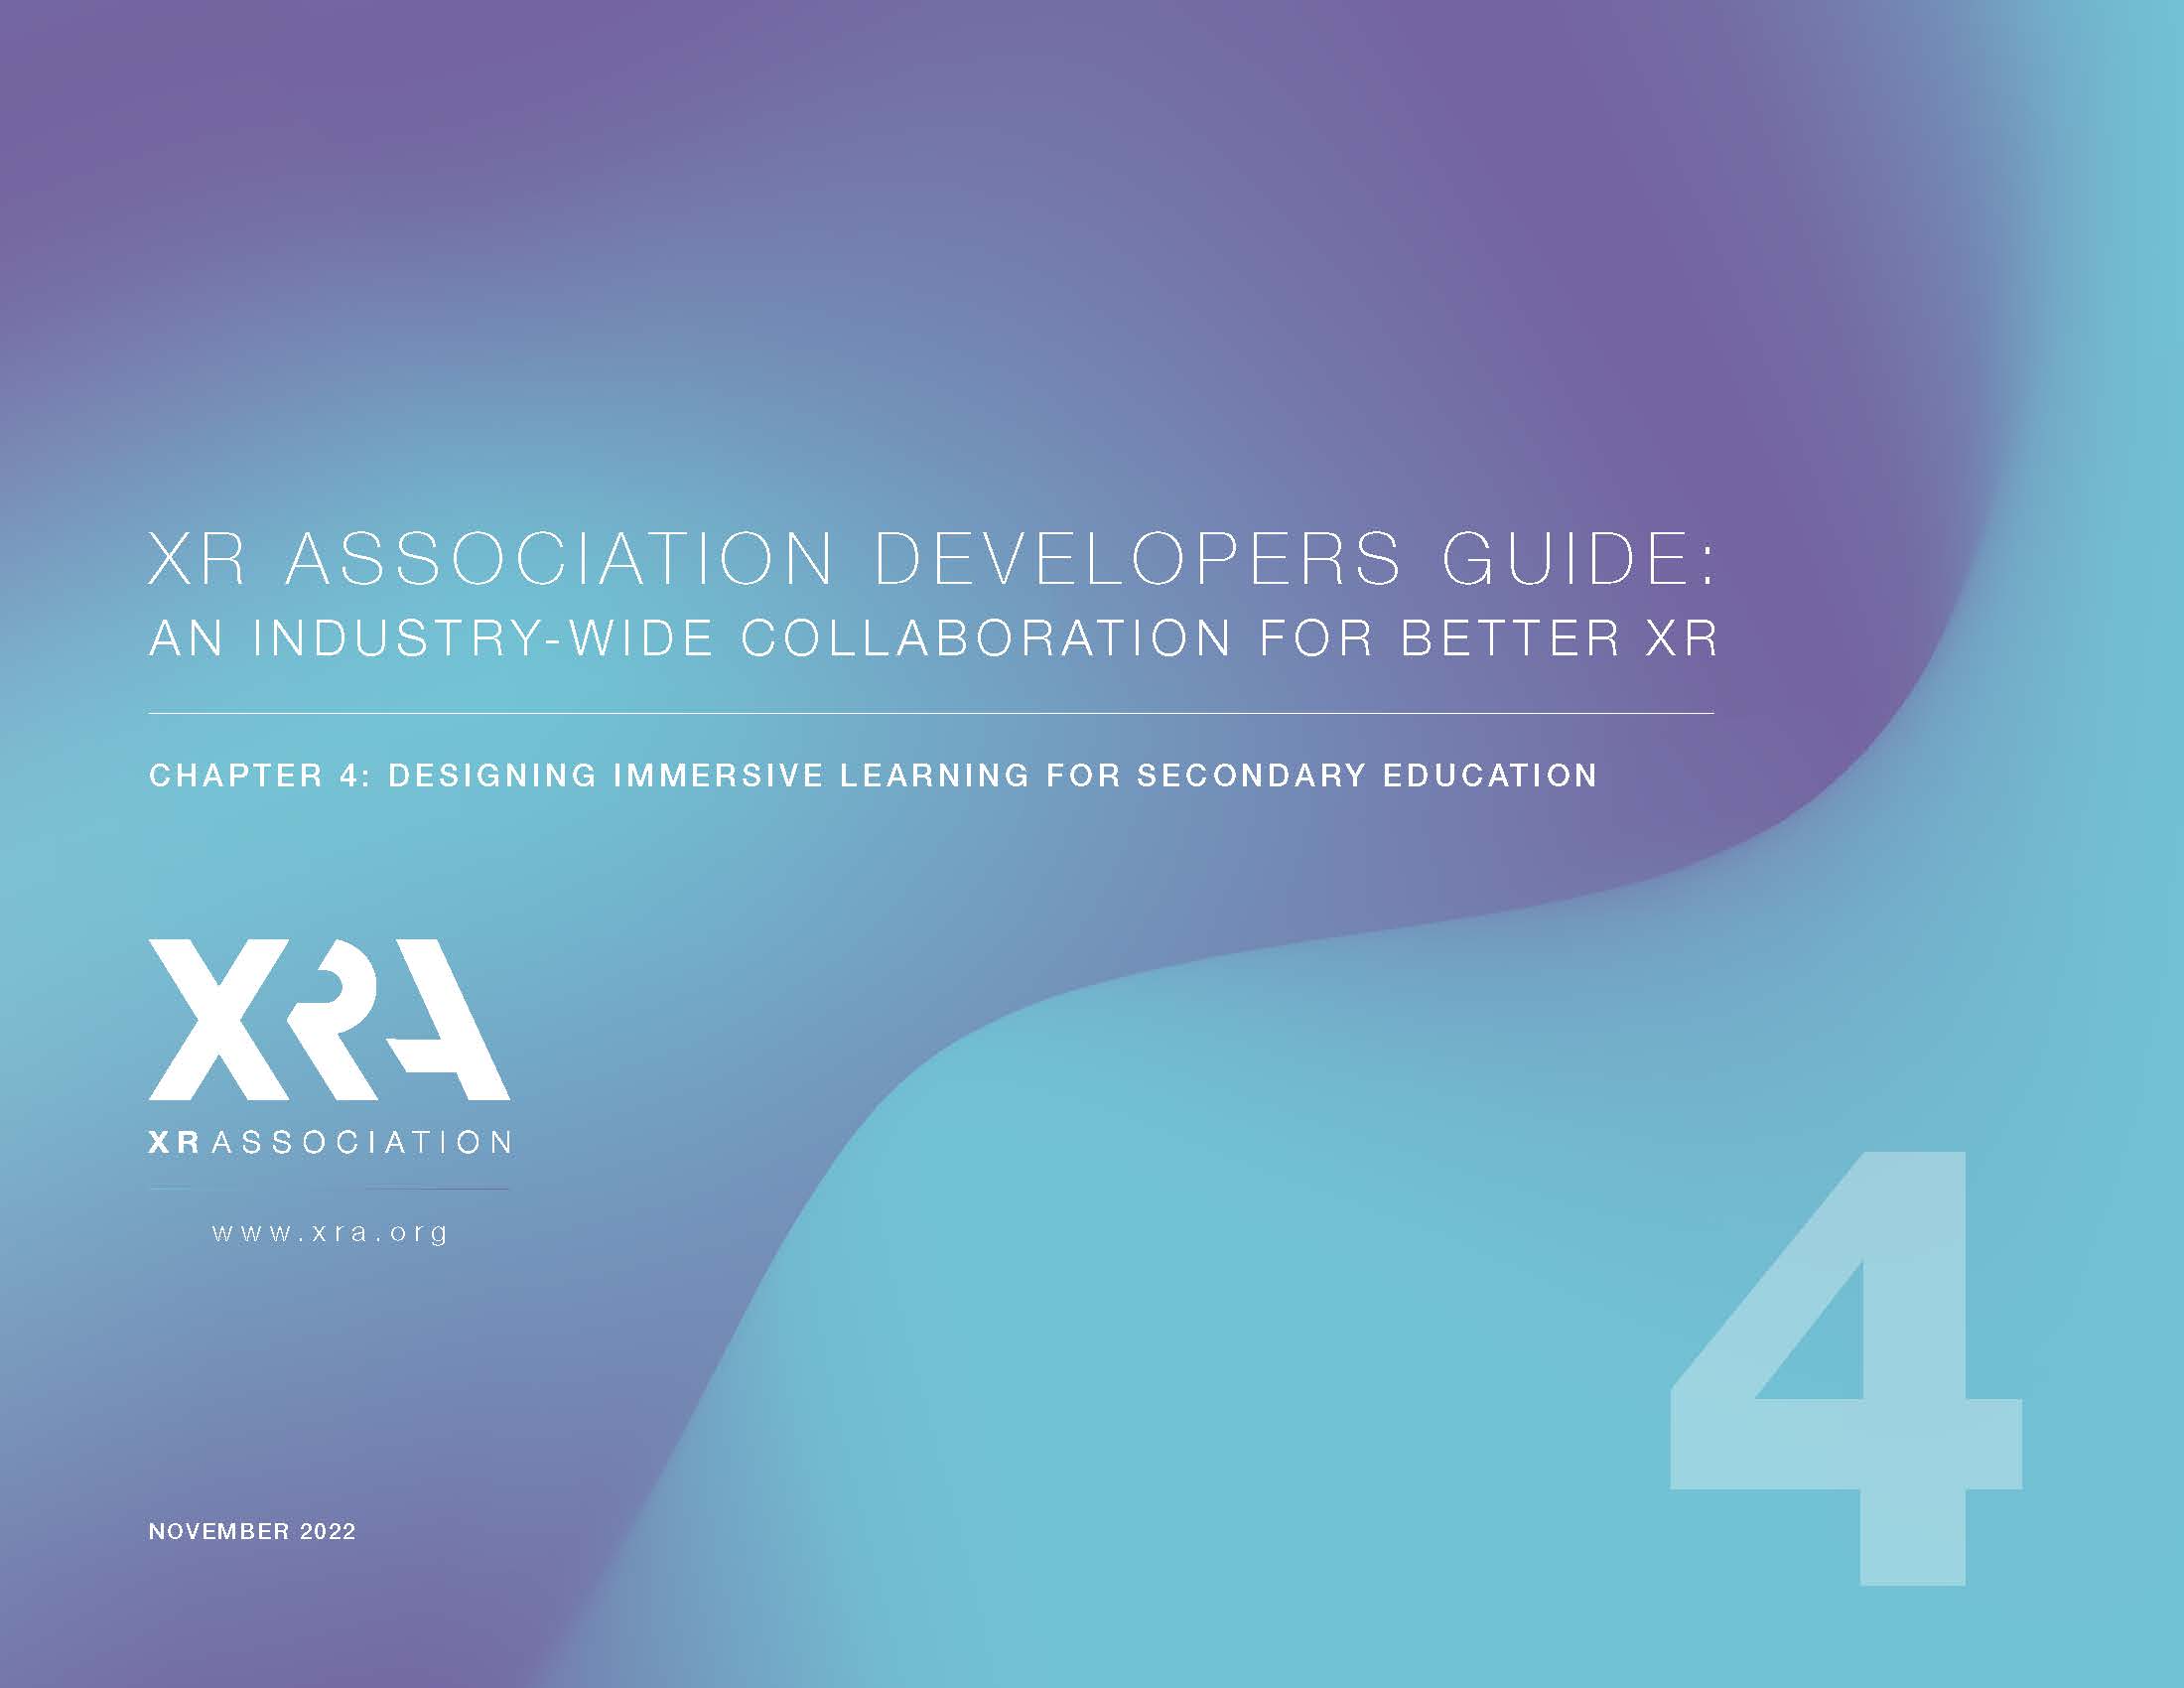 XRA’S DEVELOPERS GUIDE, CHAPTER FOUR: Designing Immersive Learning for Secondary Education